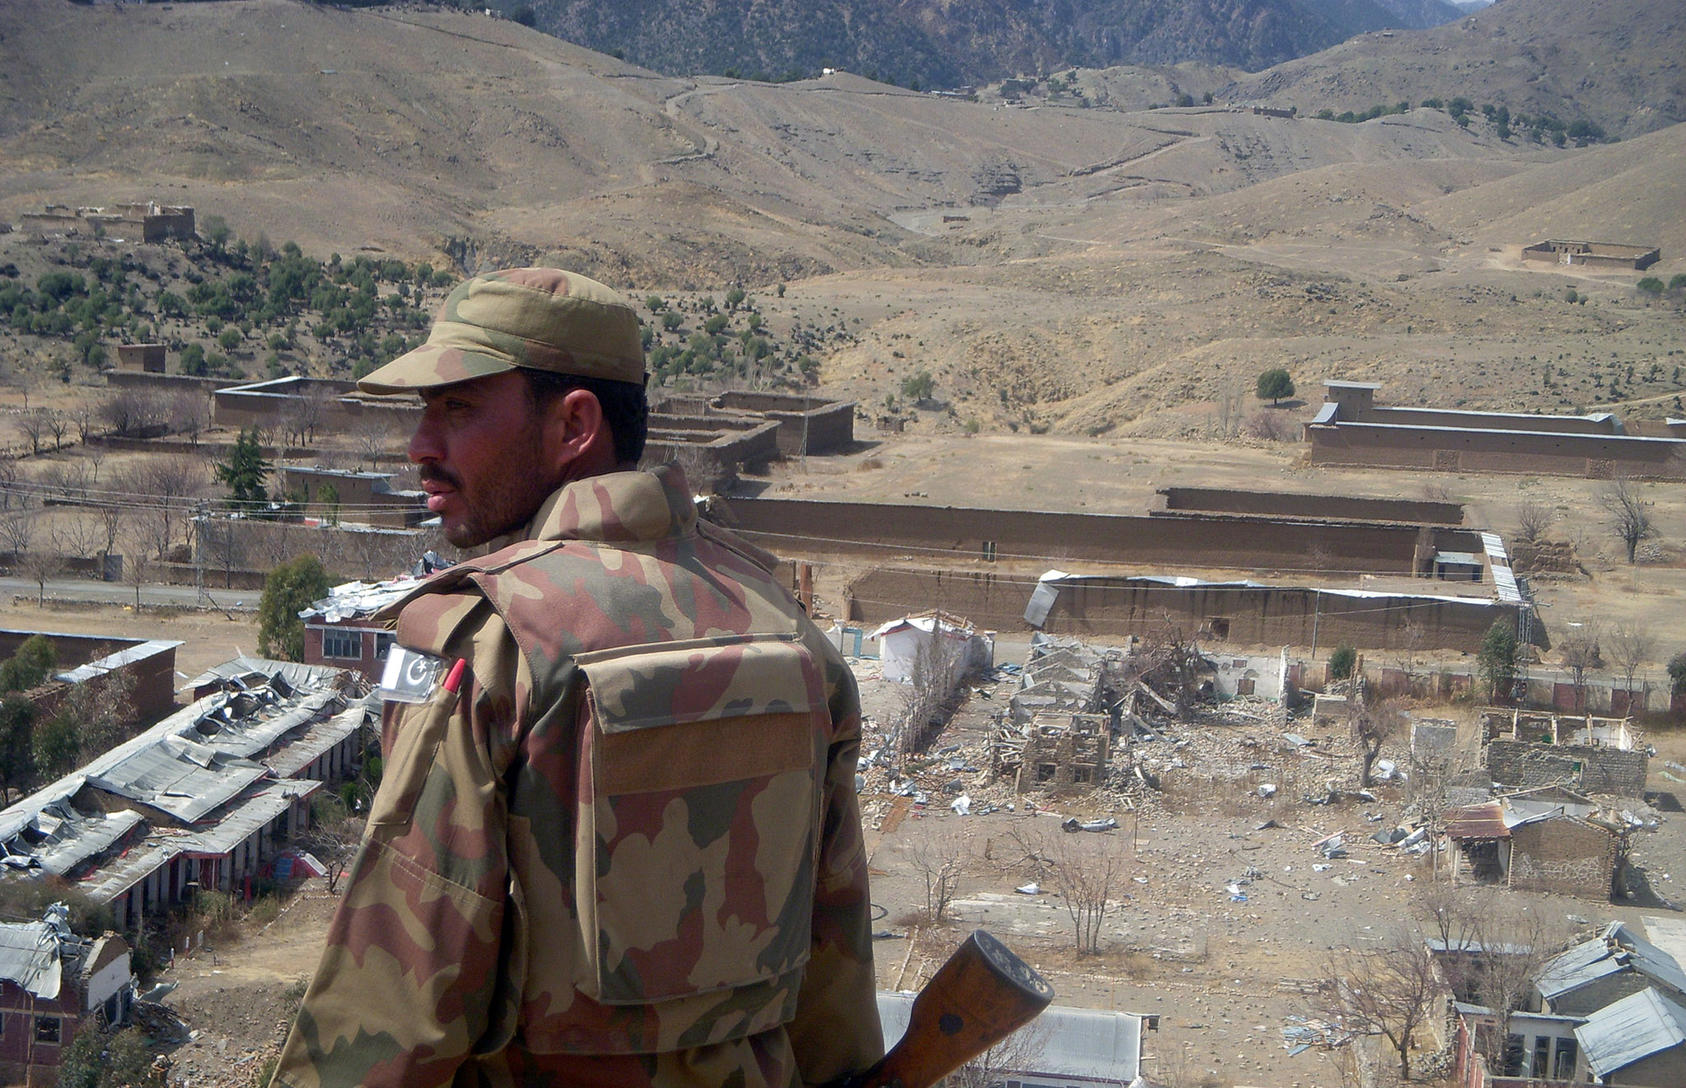 A Pakistani soldier surveys what used to be the headquarters of Baitullah Mehsud, the TTP leader who was killed in March 2010. (Pir Zubair Shah/New York Times)